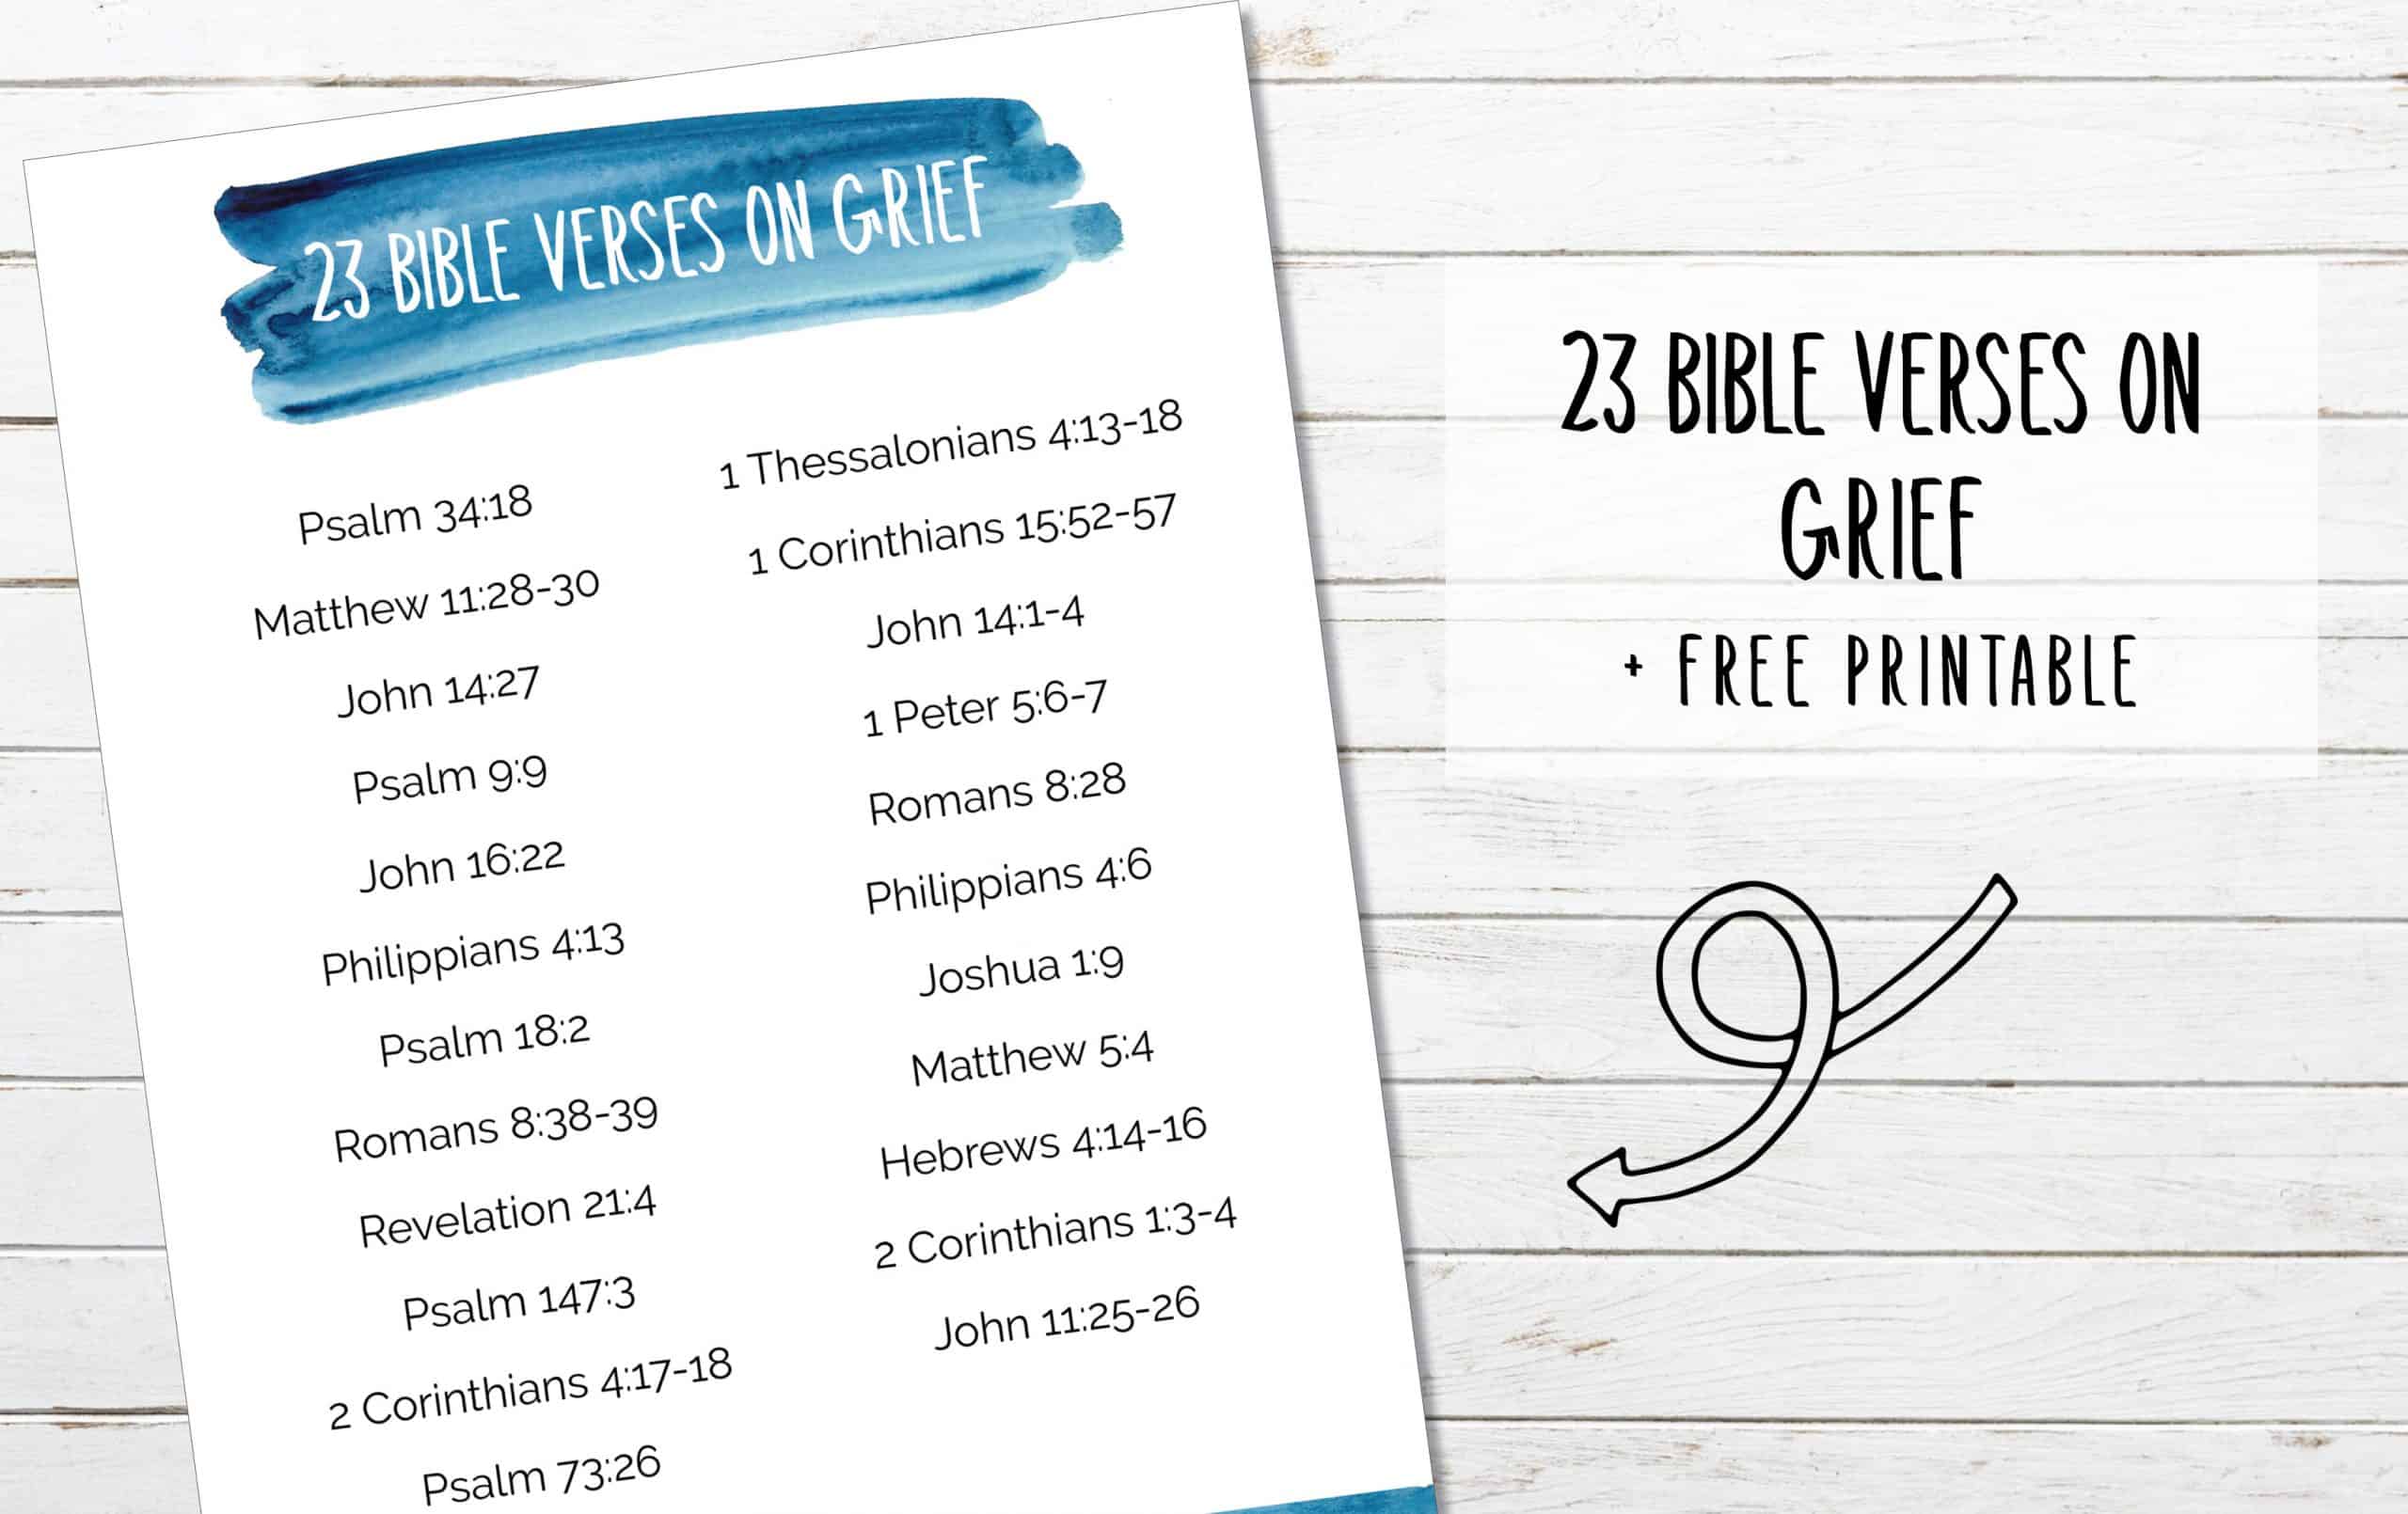 23 Bible Verses on Grief